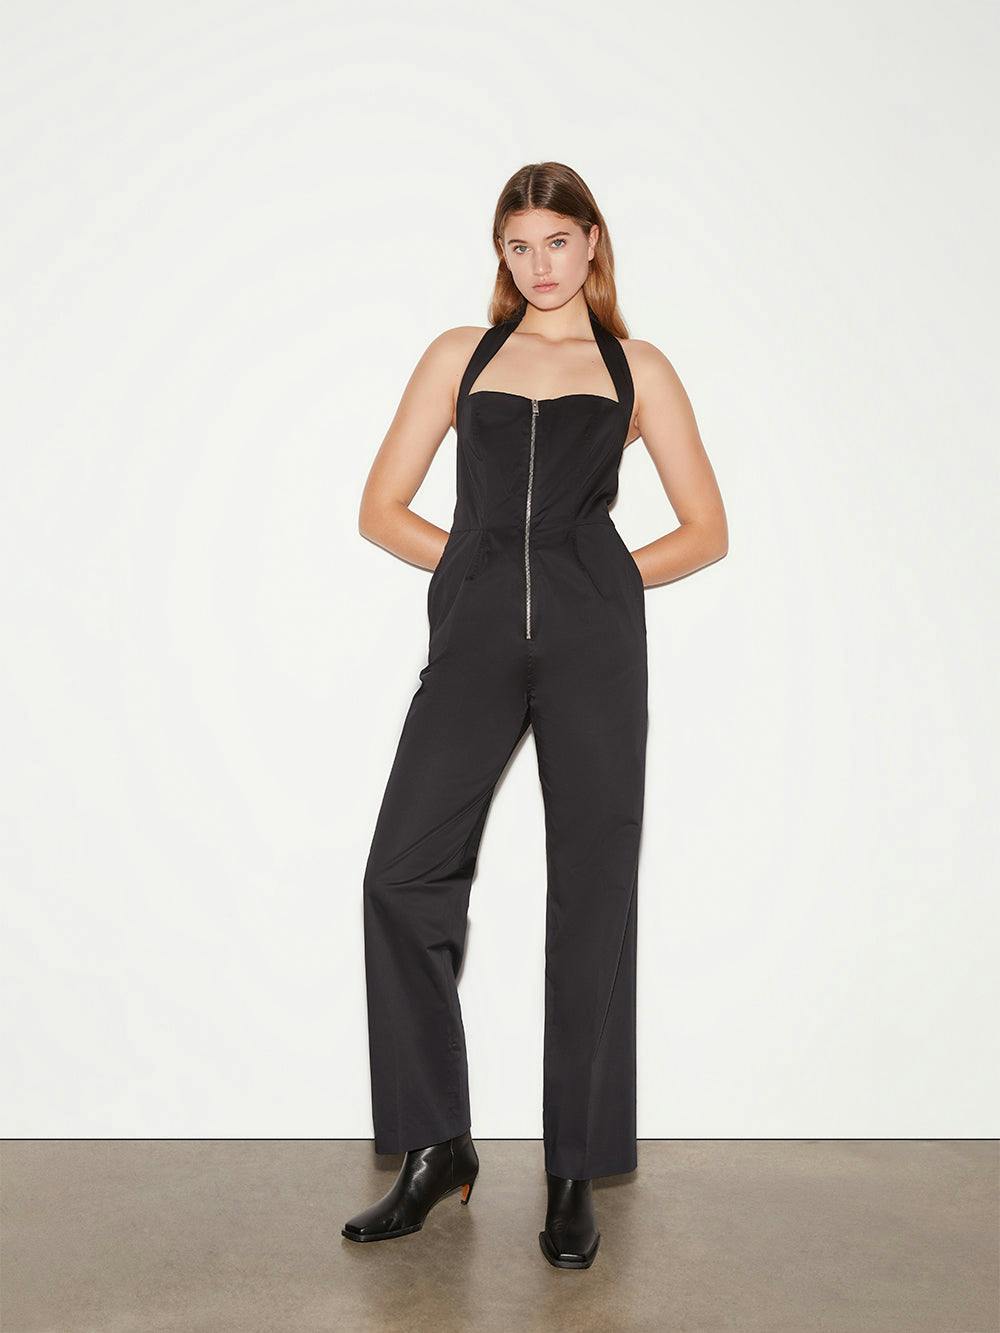 jumpsuit full body view